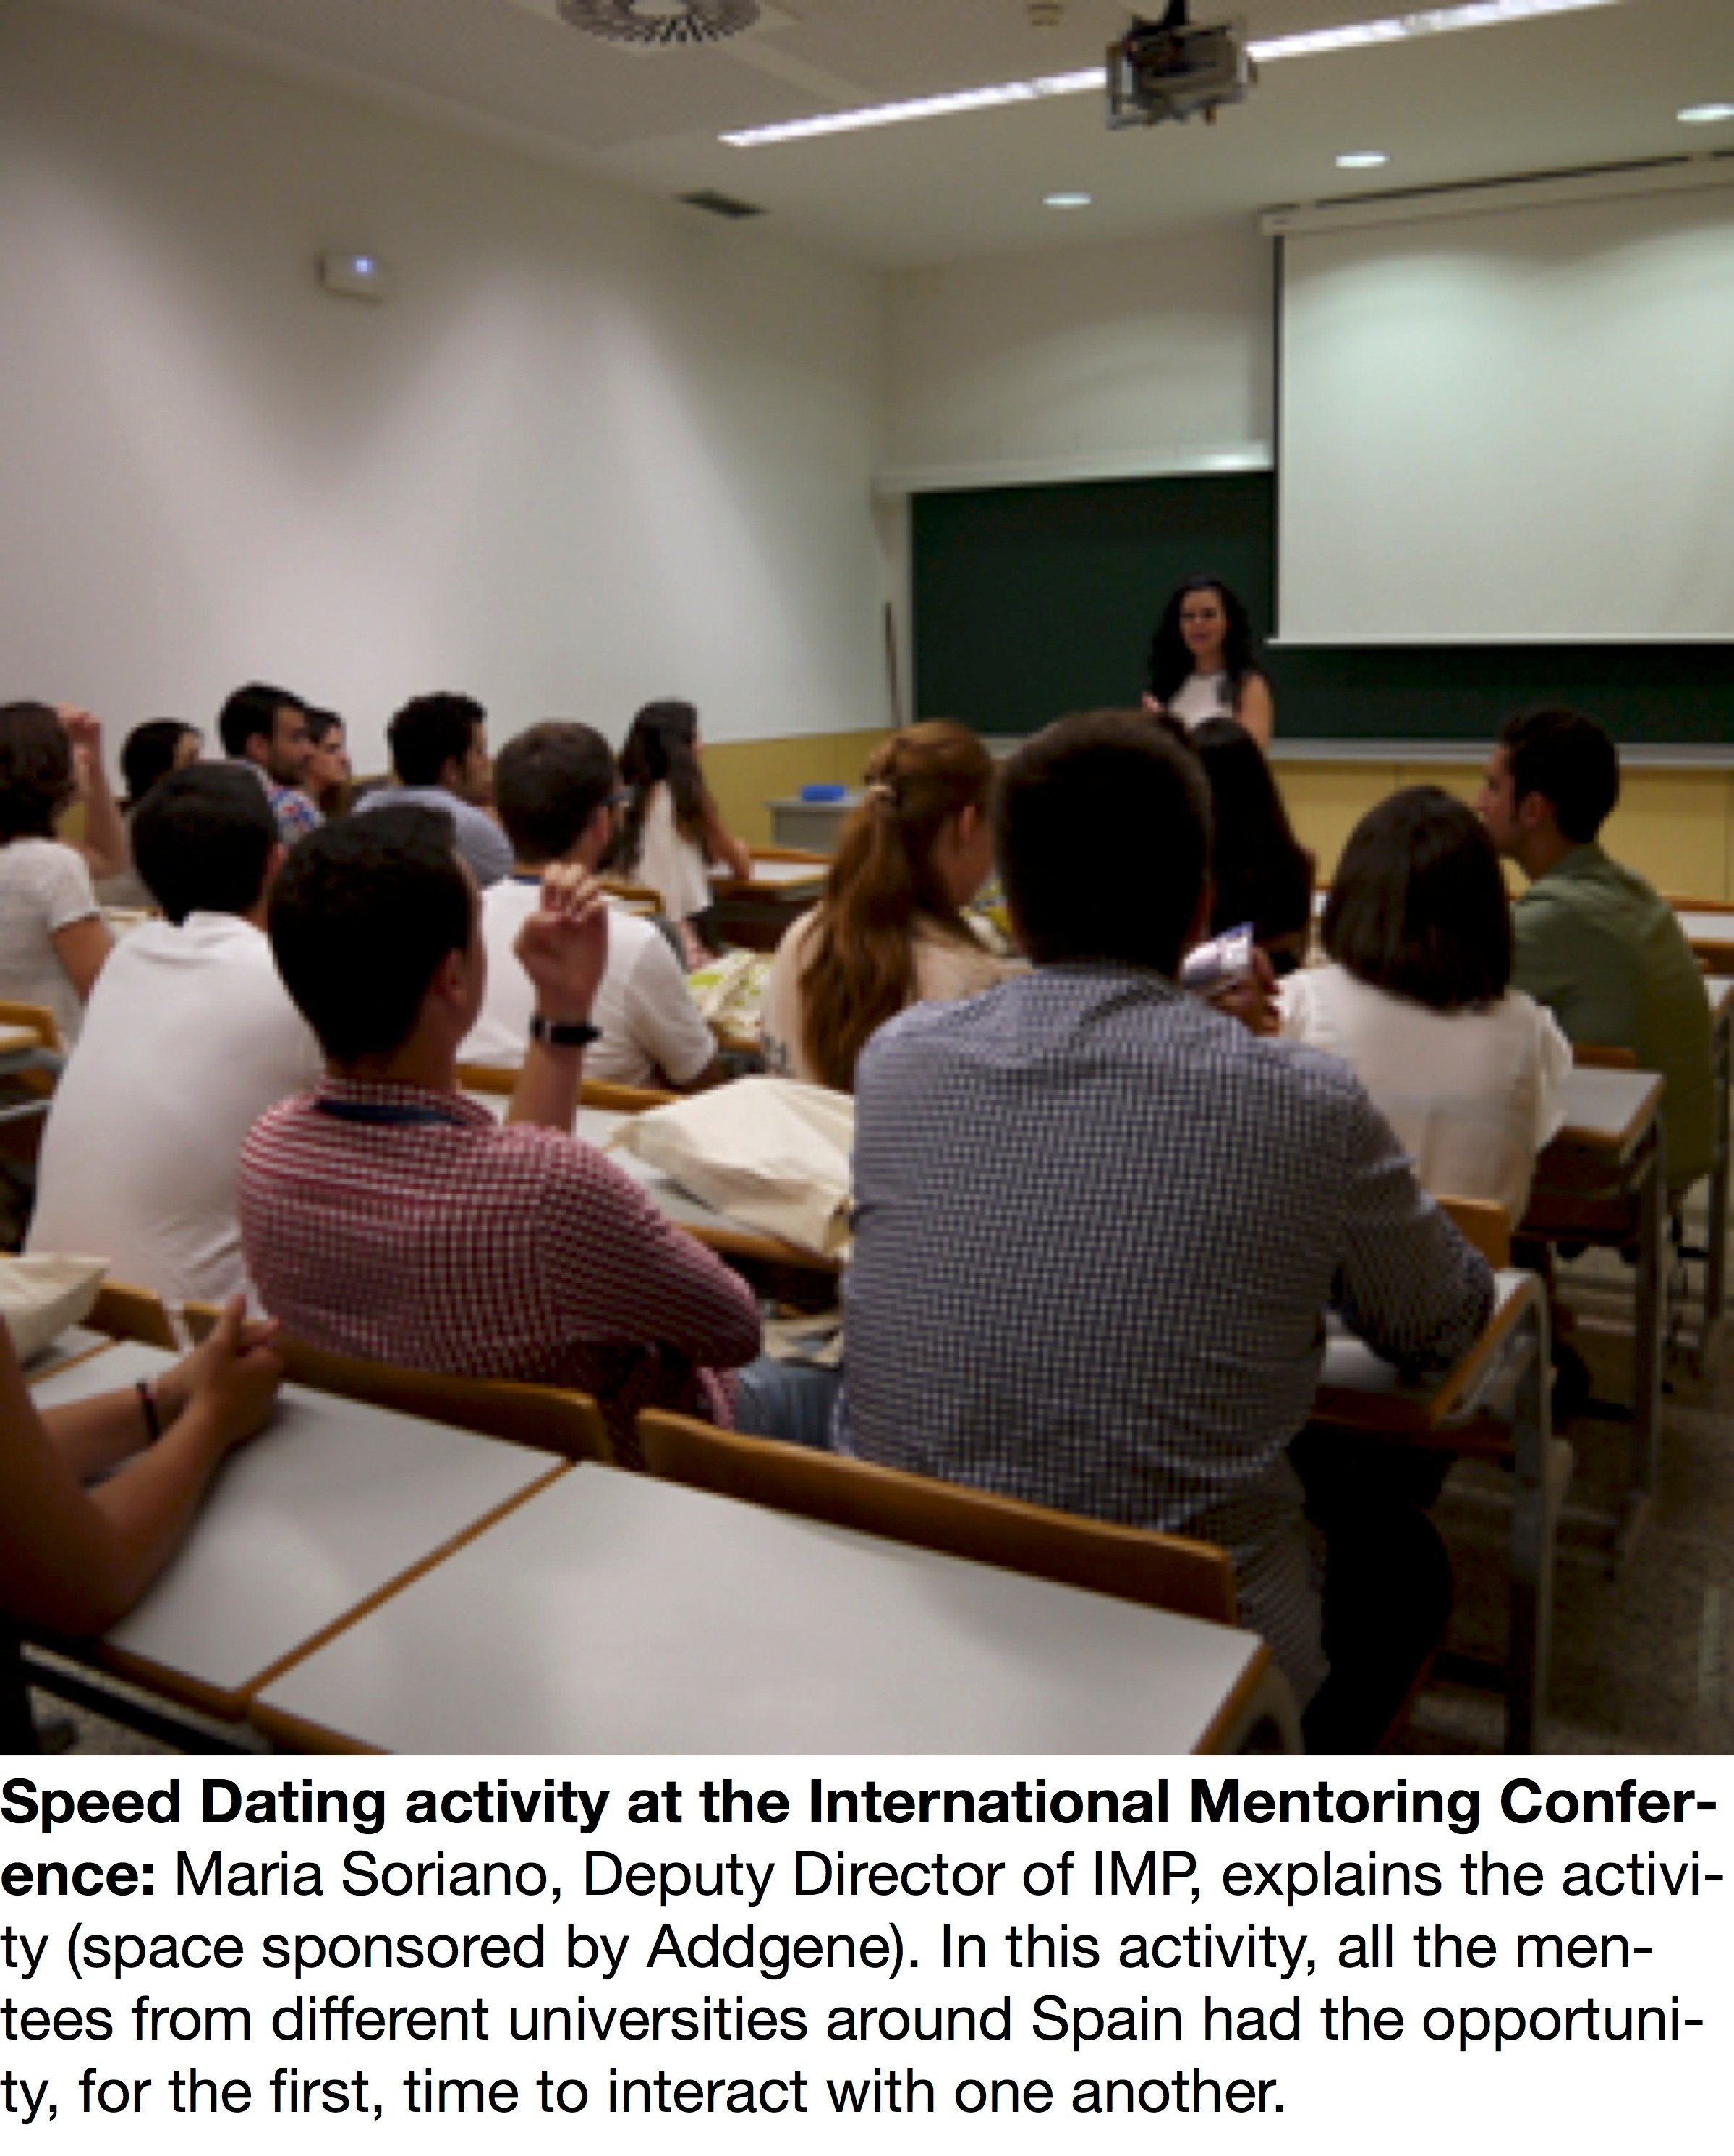 speed dating activity at the International Mentoring Conference 2014-2015.